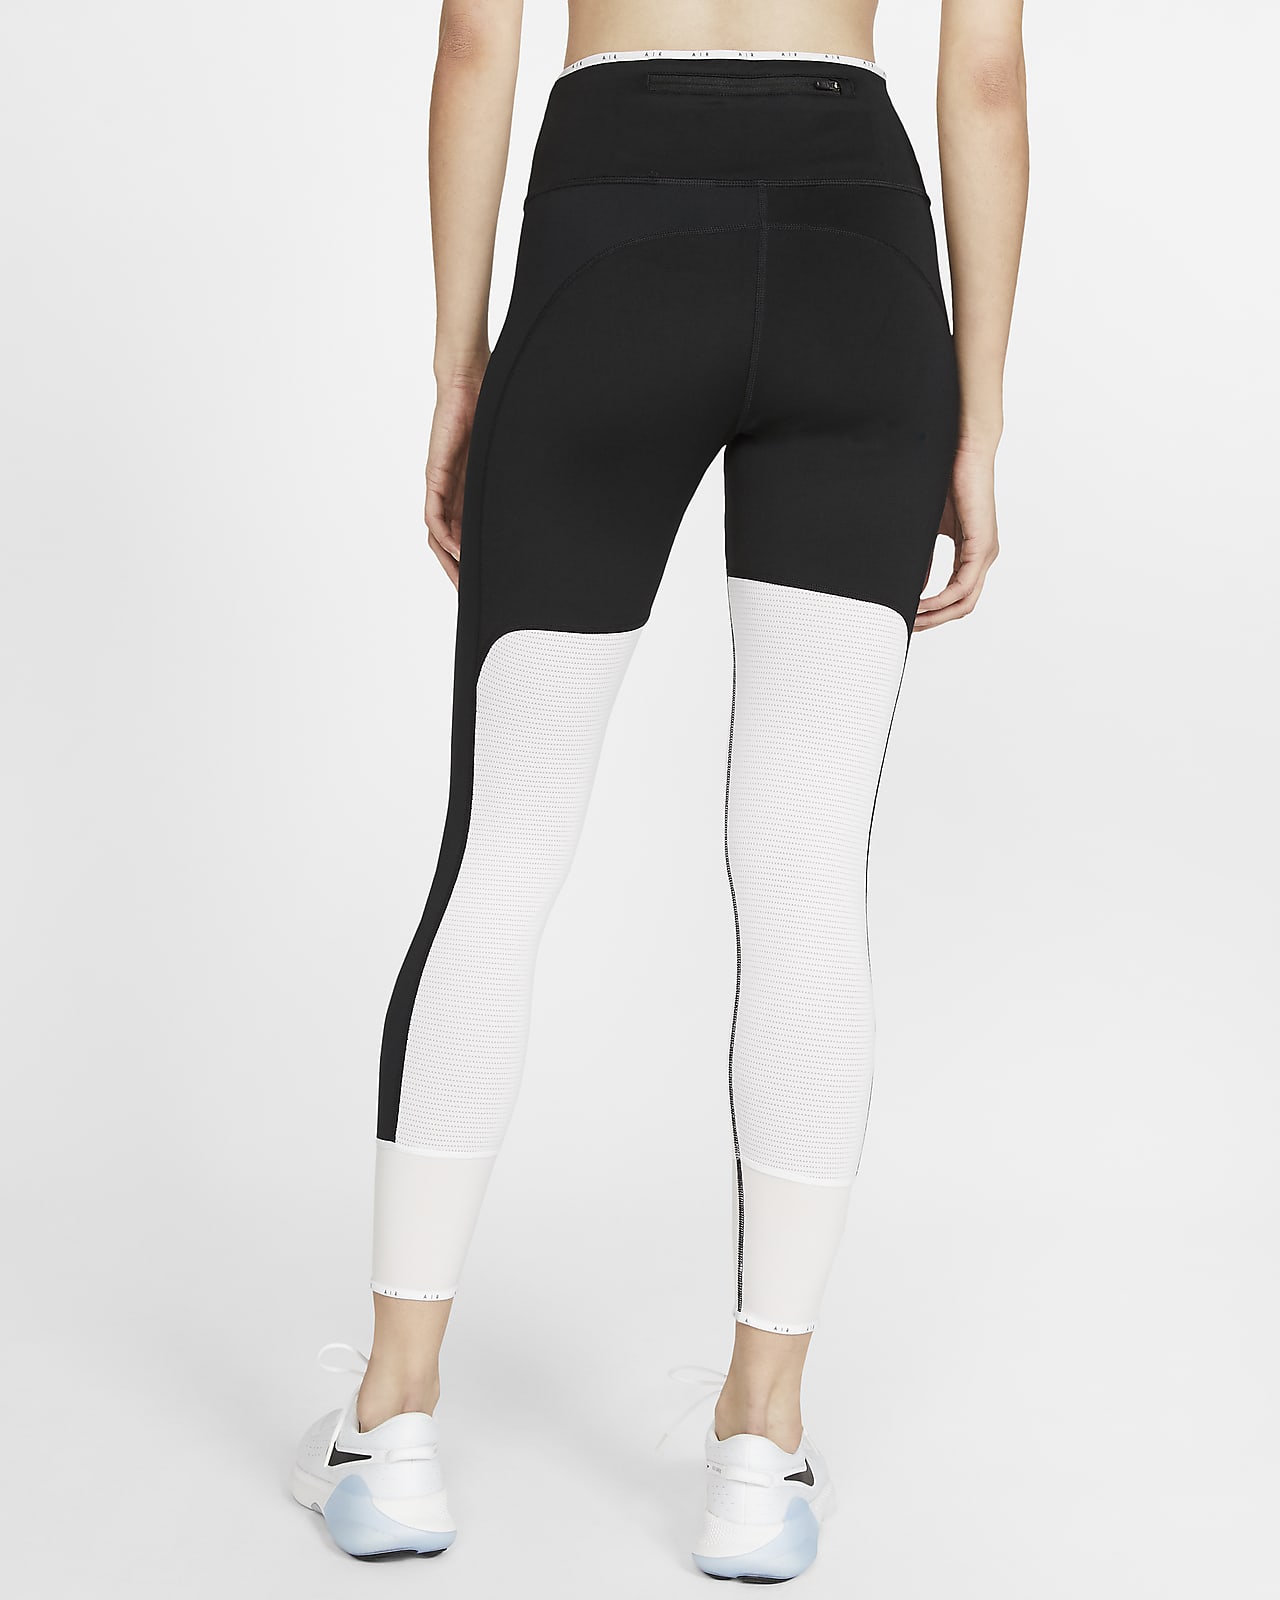 nike black and white tights